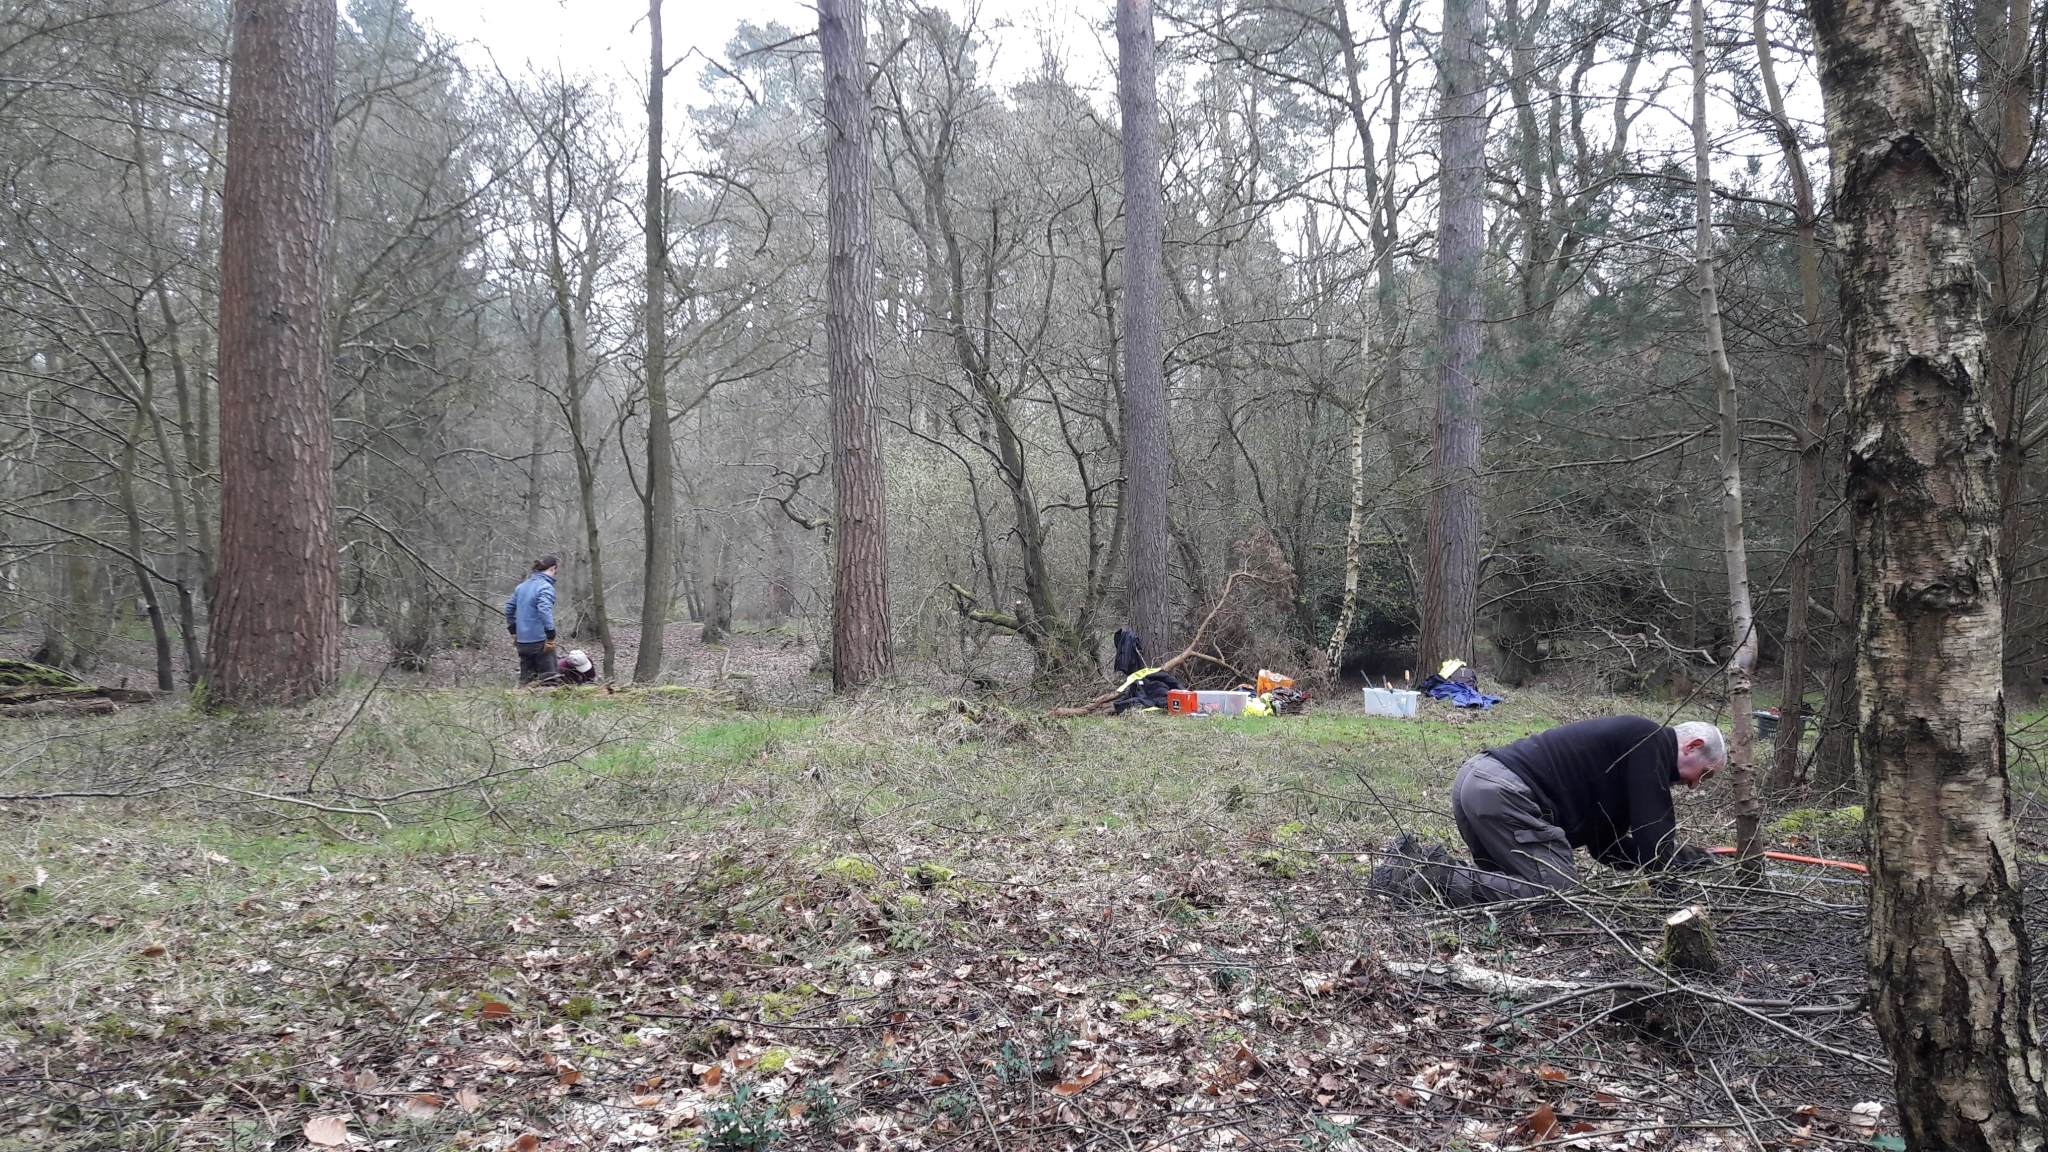 A photo from the FoTF Conservation Event - April 2018 - Improving habitat at High Lodge : Volunteers work amongst the trees